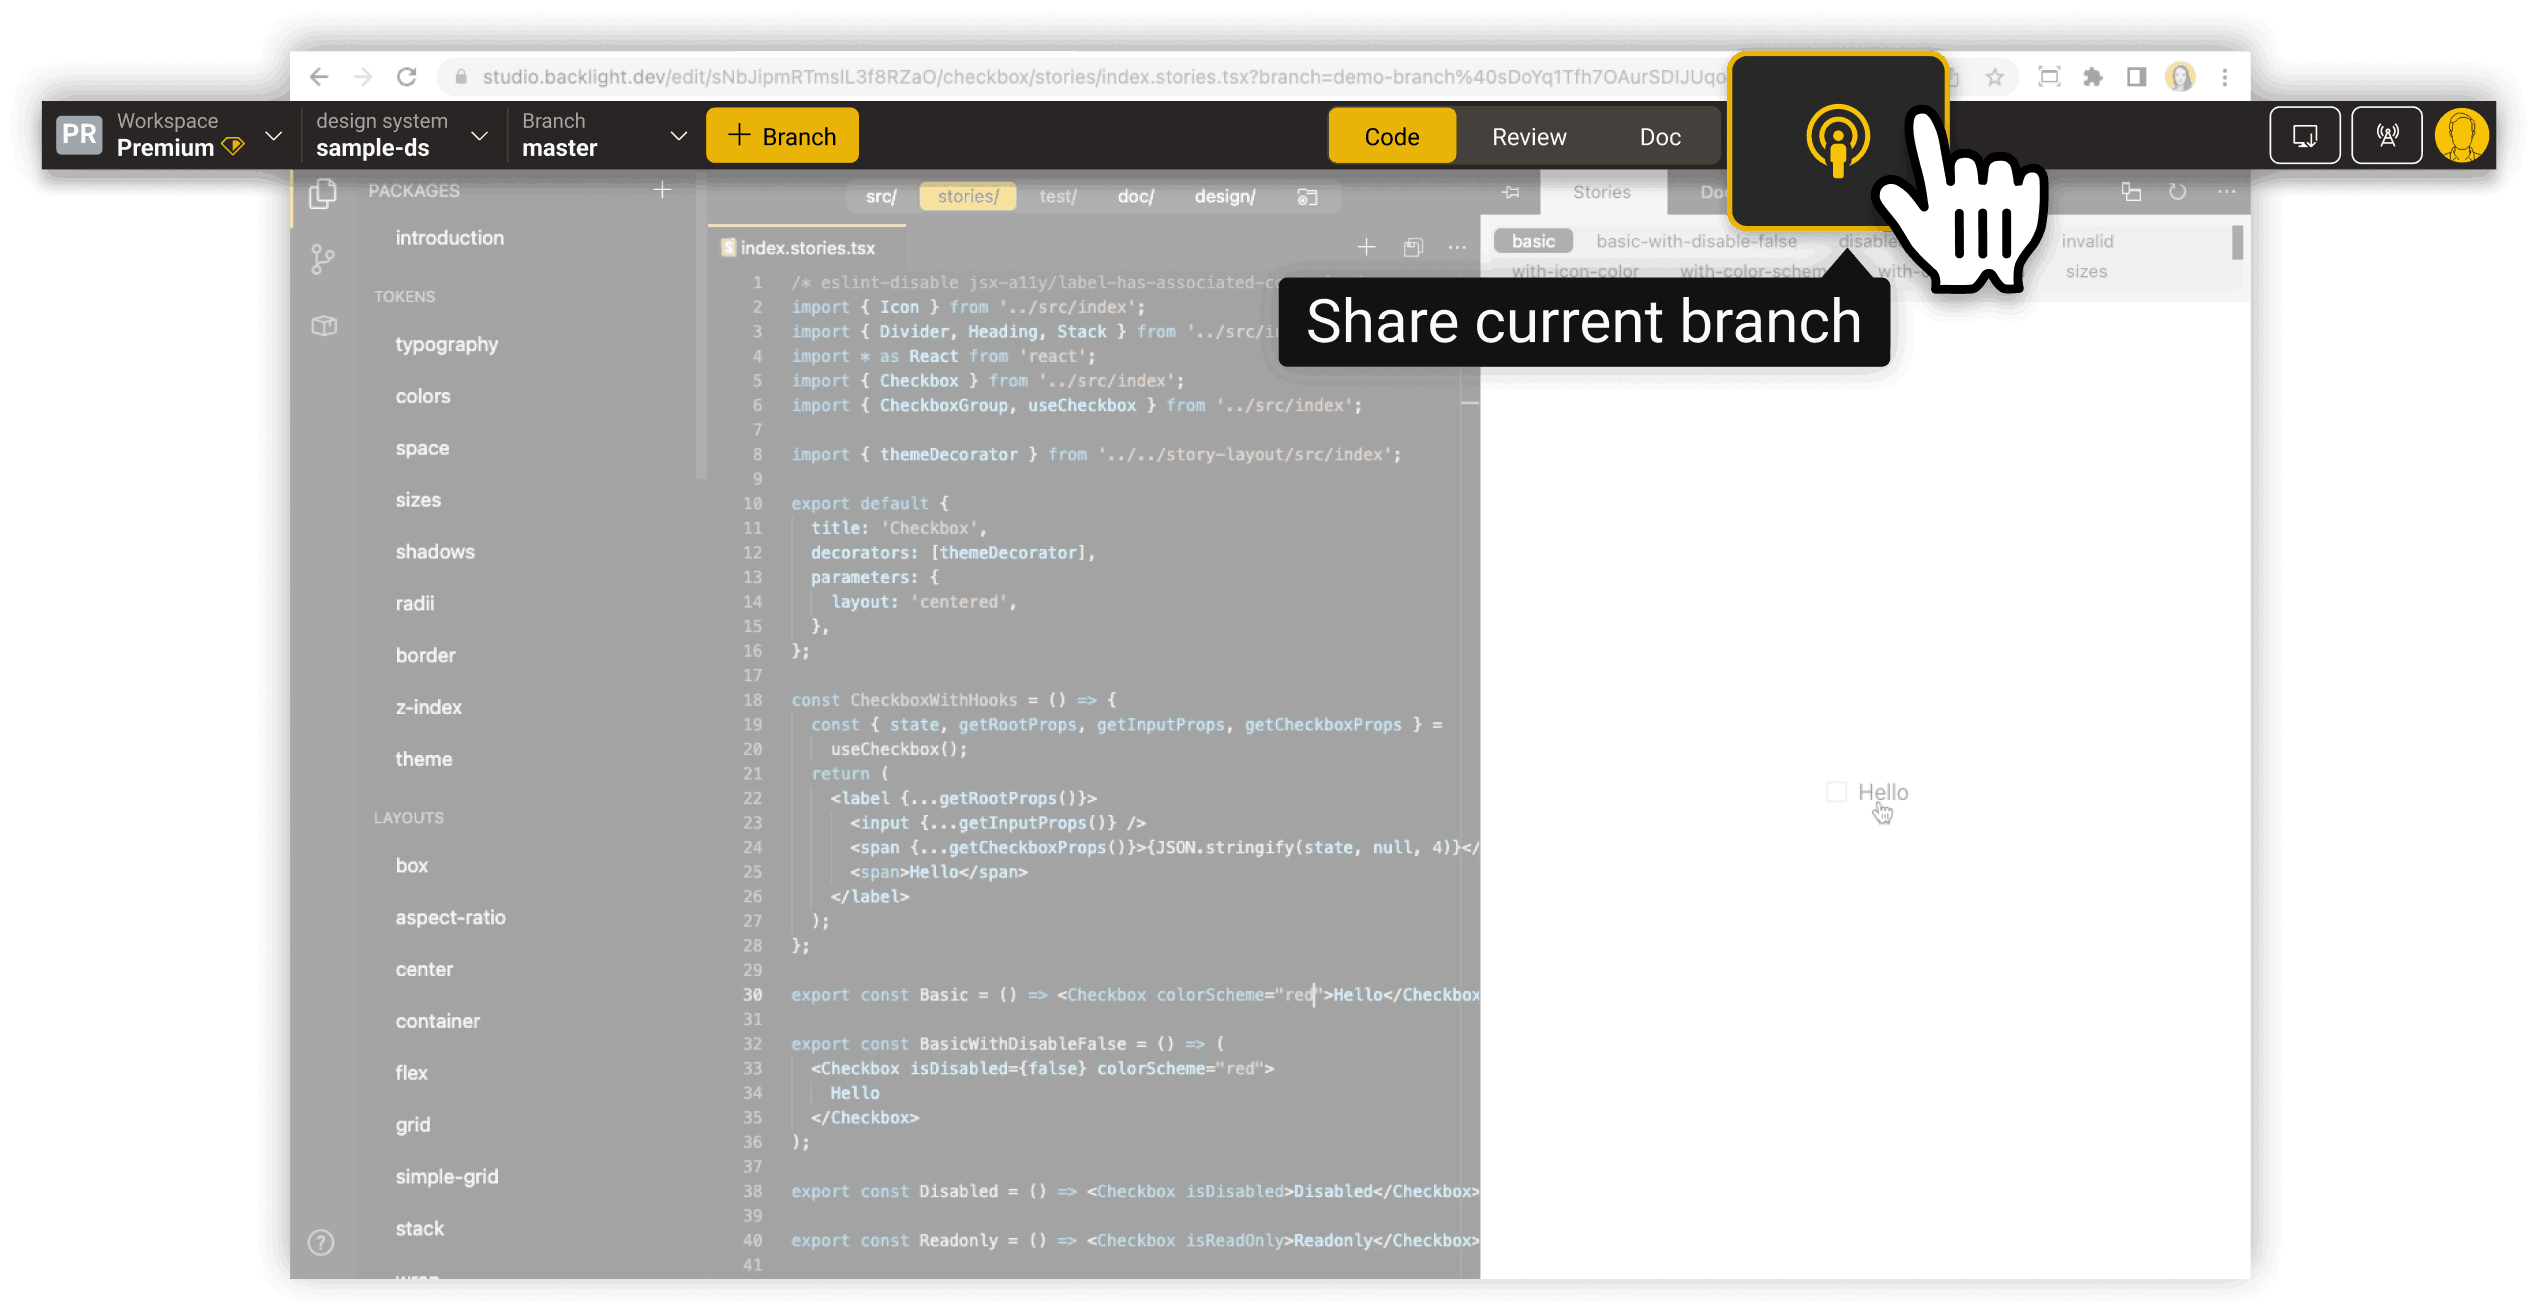 Screenshot of the "Share current branch" button